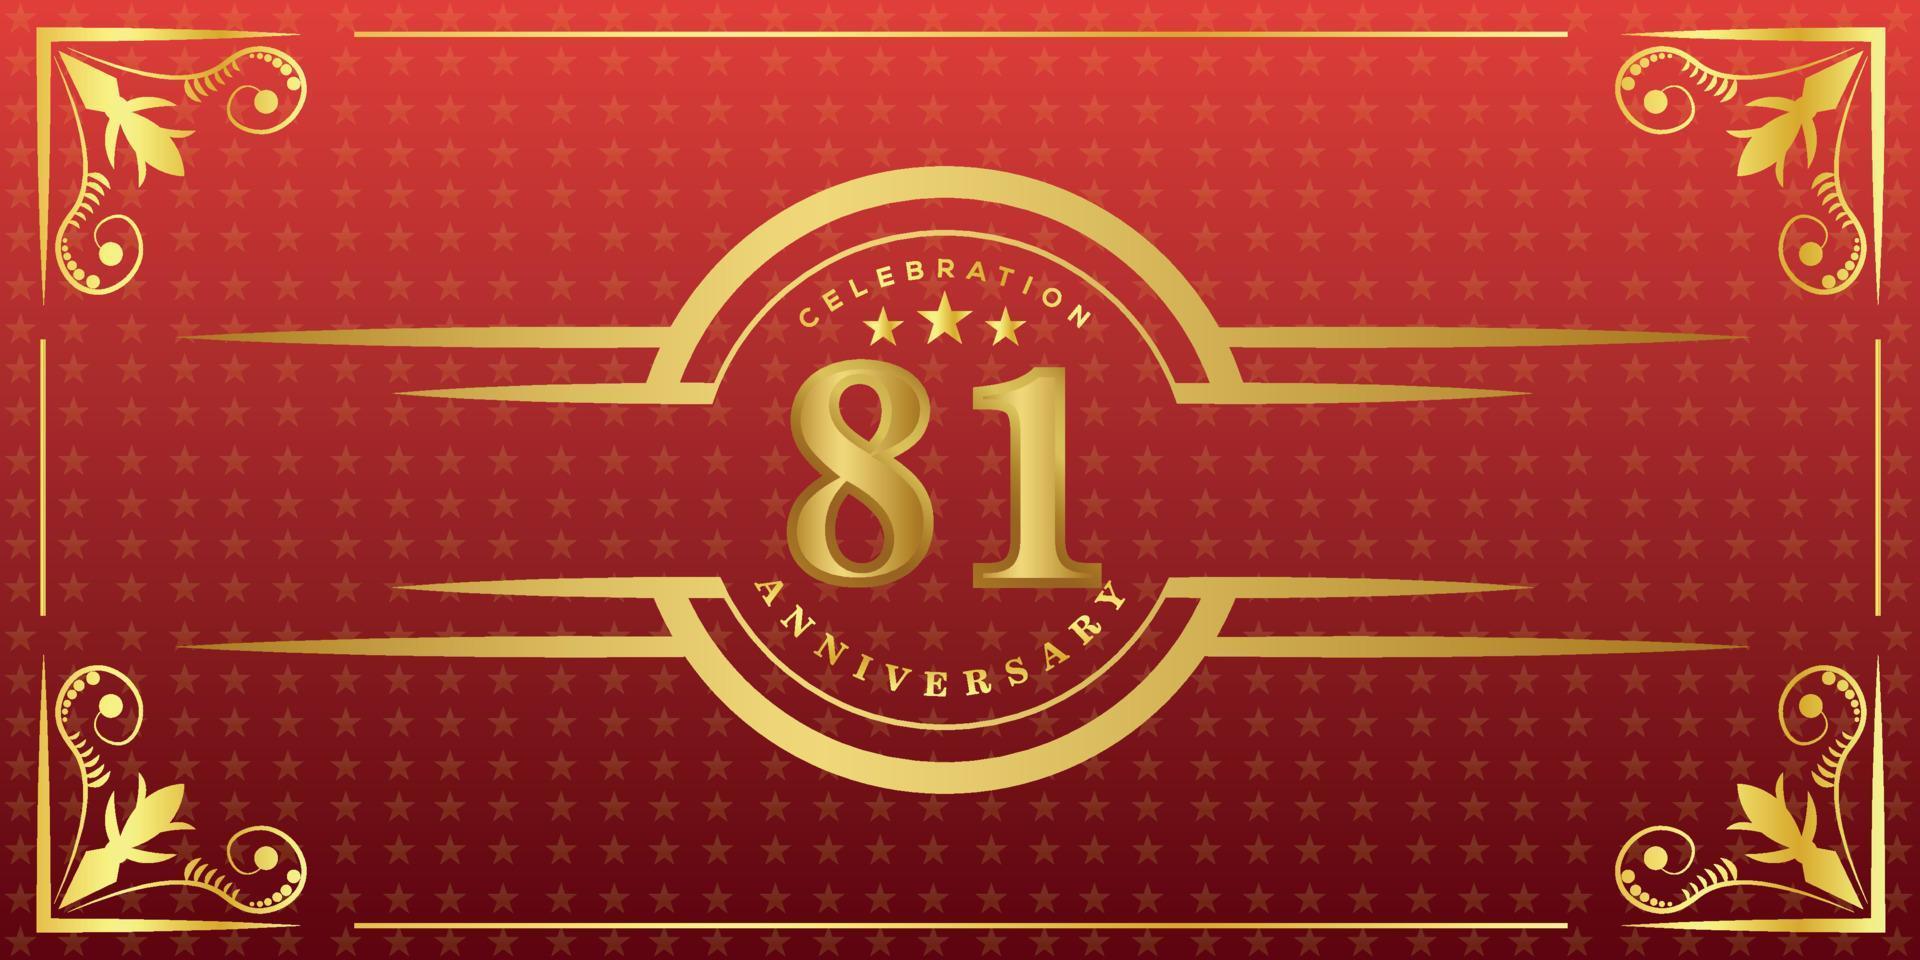 81st anniversary logo with golden ring, confetti and gold border isolated on elegant red background, sparkle, vector design for greeting card and invitation card